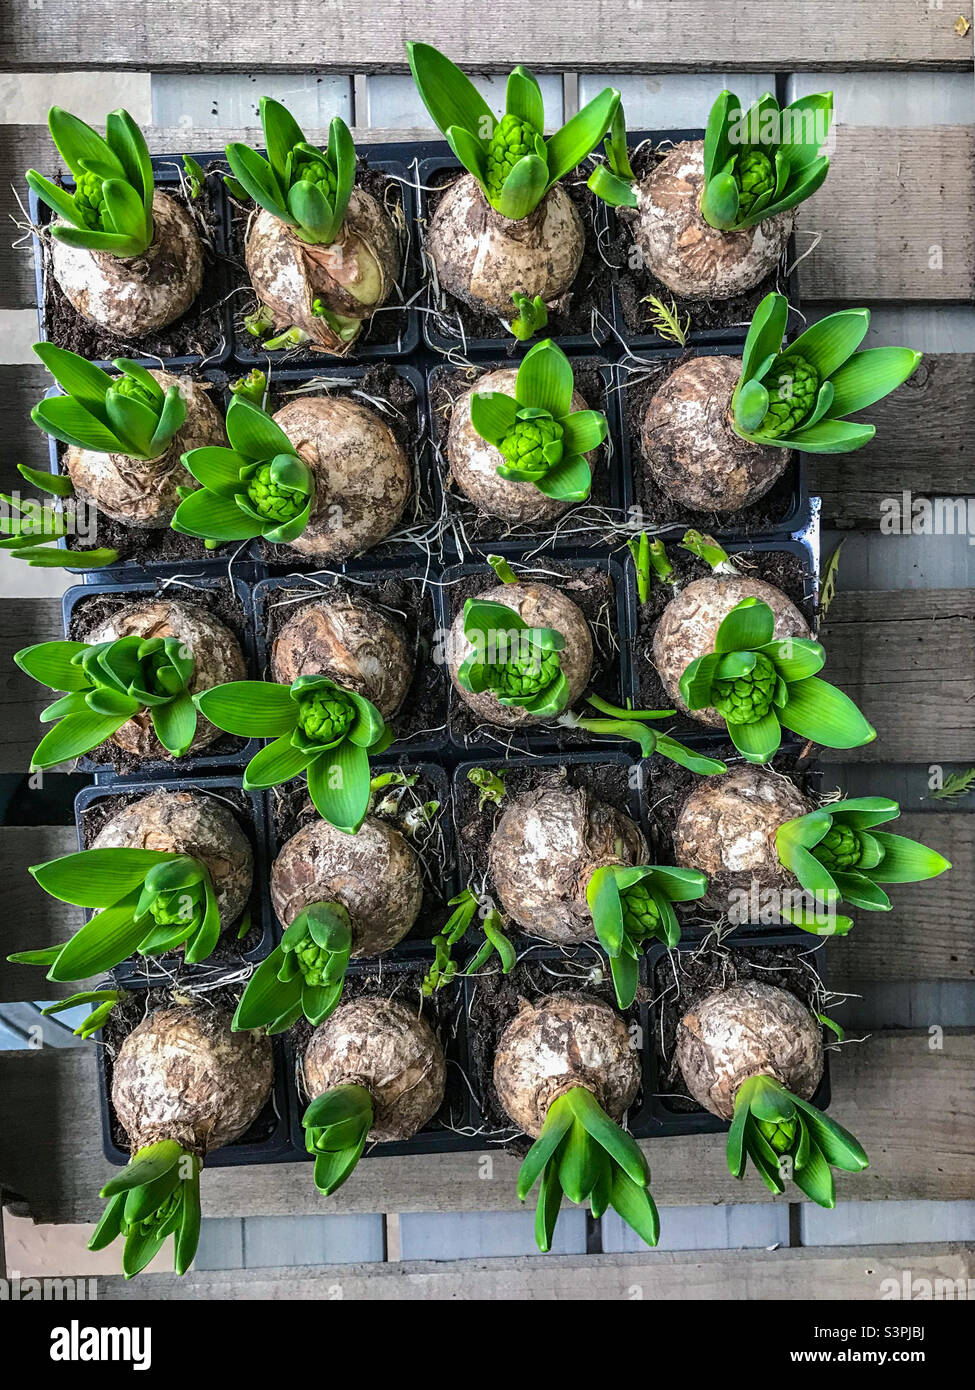 Tray of green sprouted bulbs Stock Photo